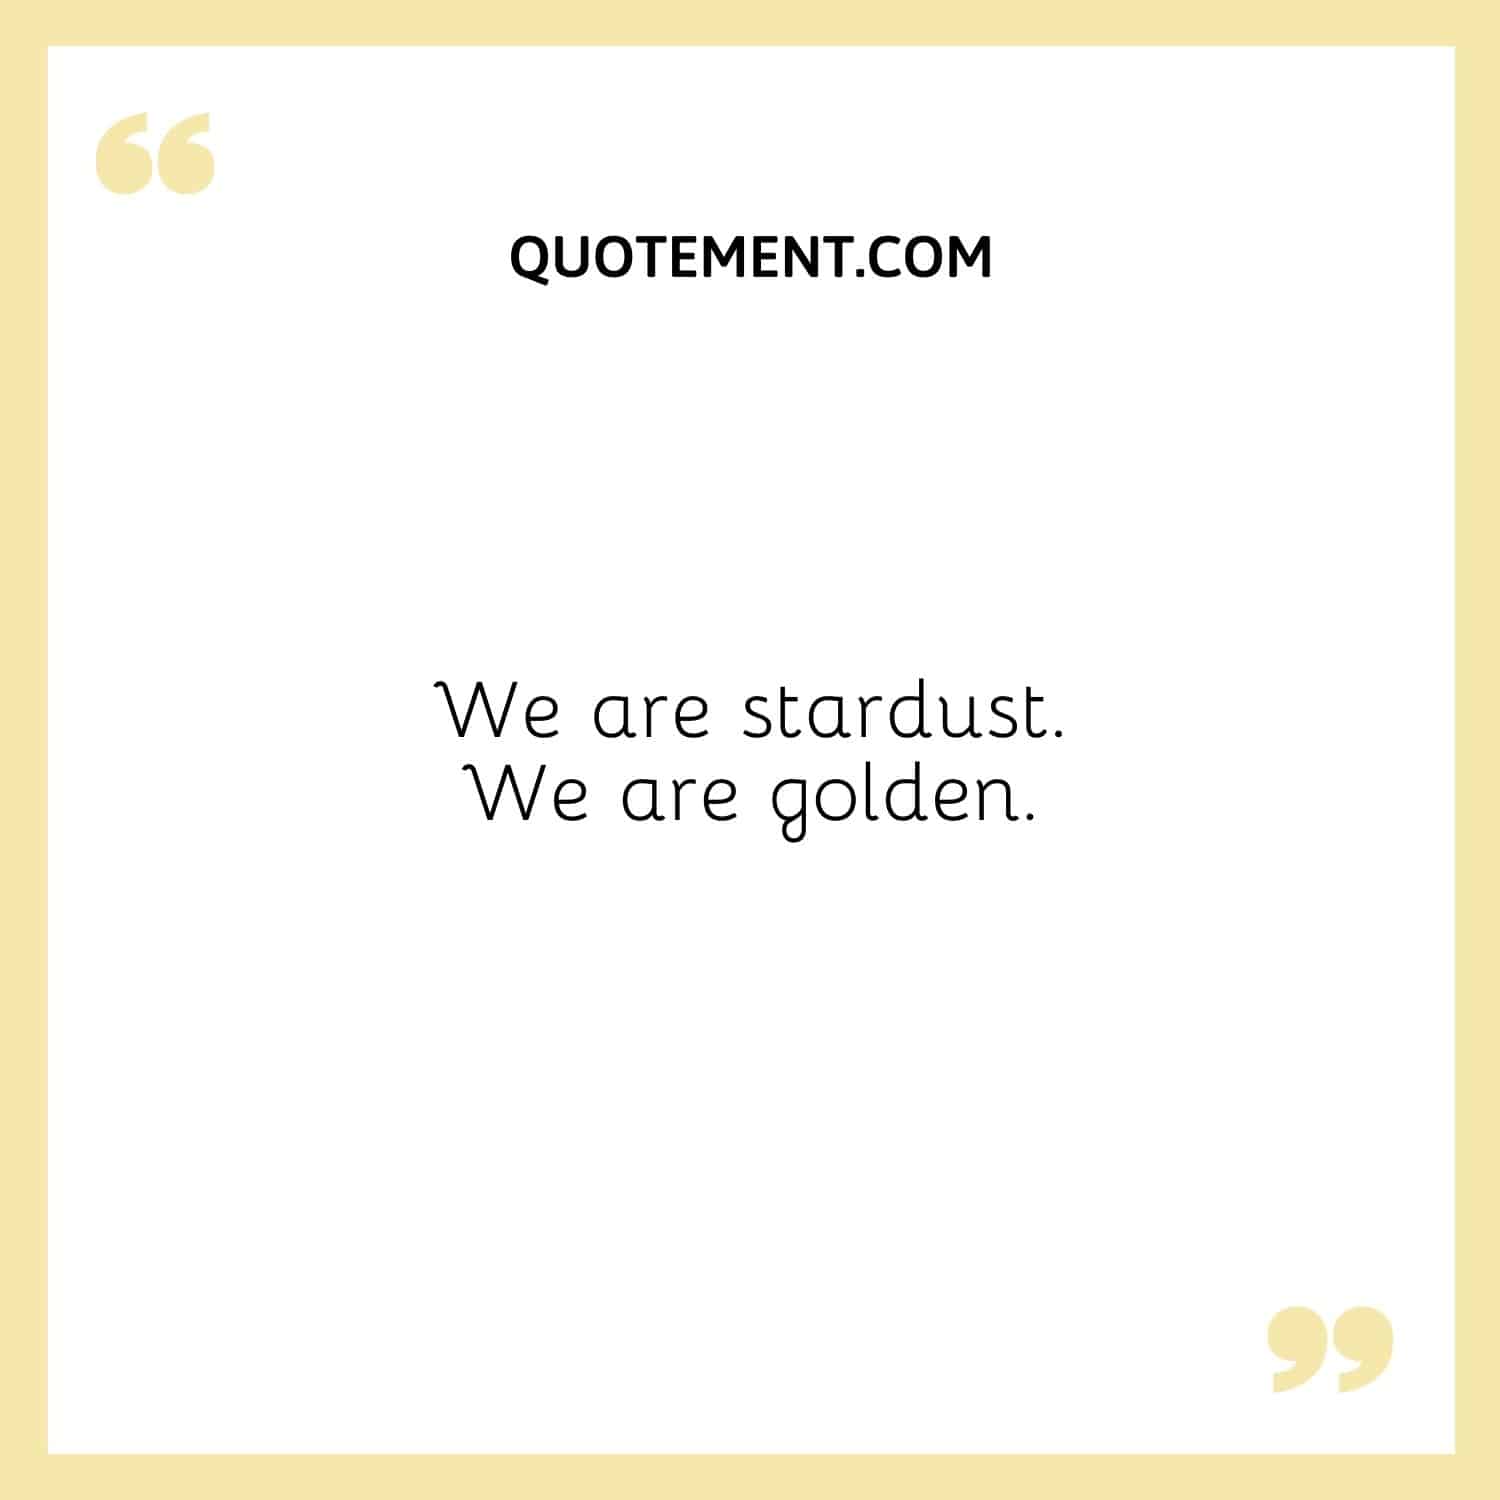 We are stardust. We are golden.